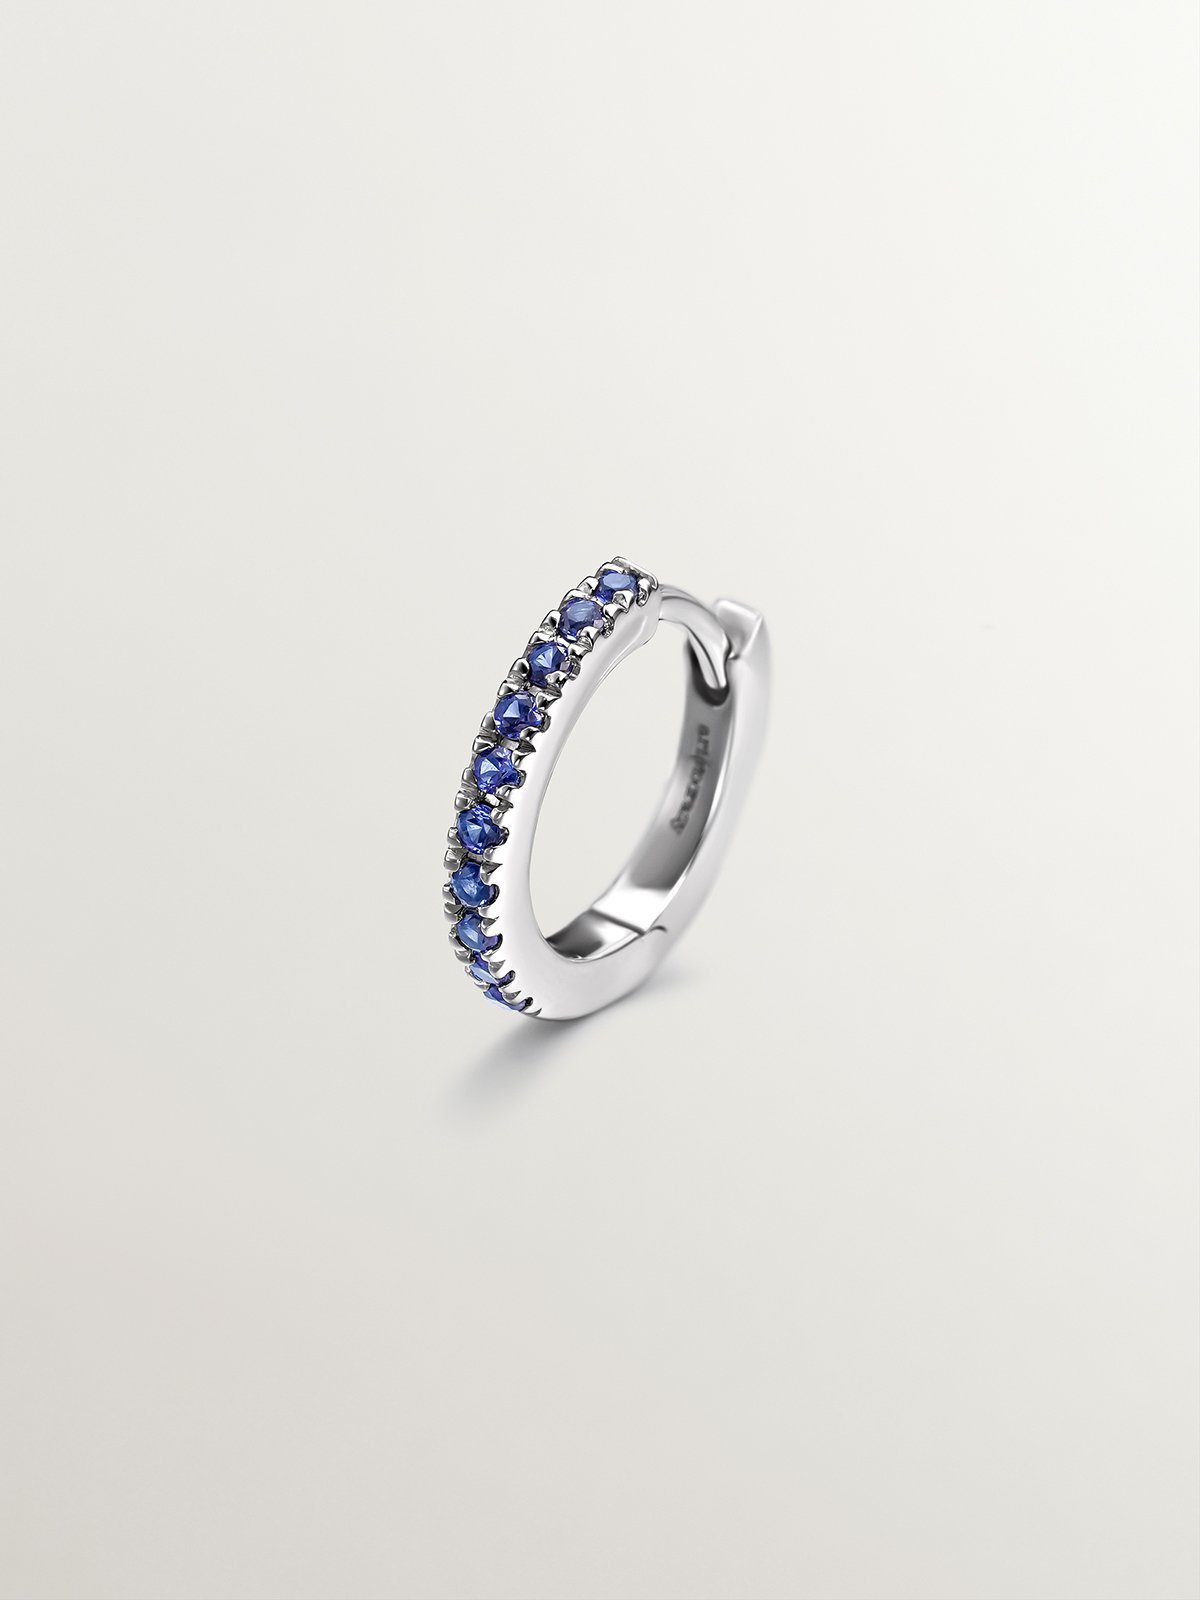 Individual small hoop earring made of 9K white gold with blue sapphires.